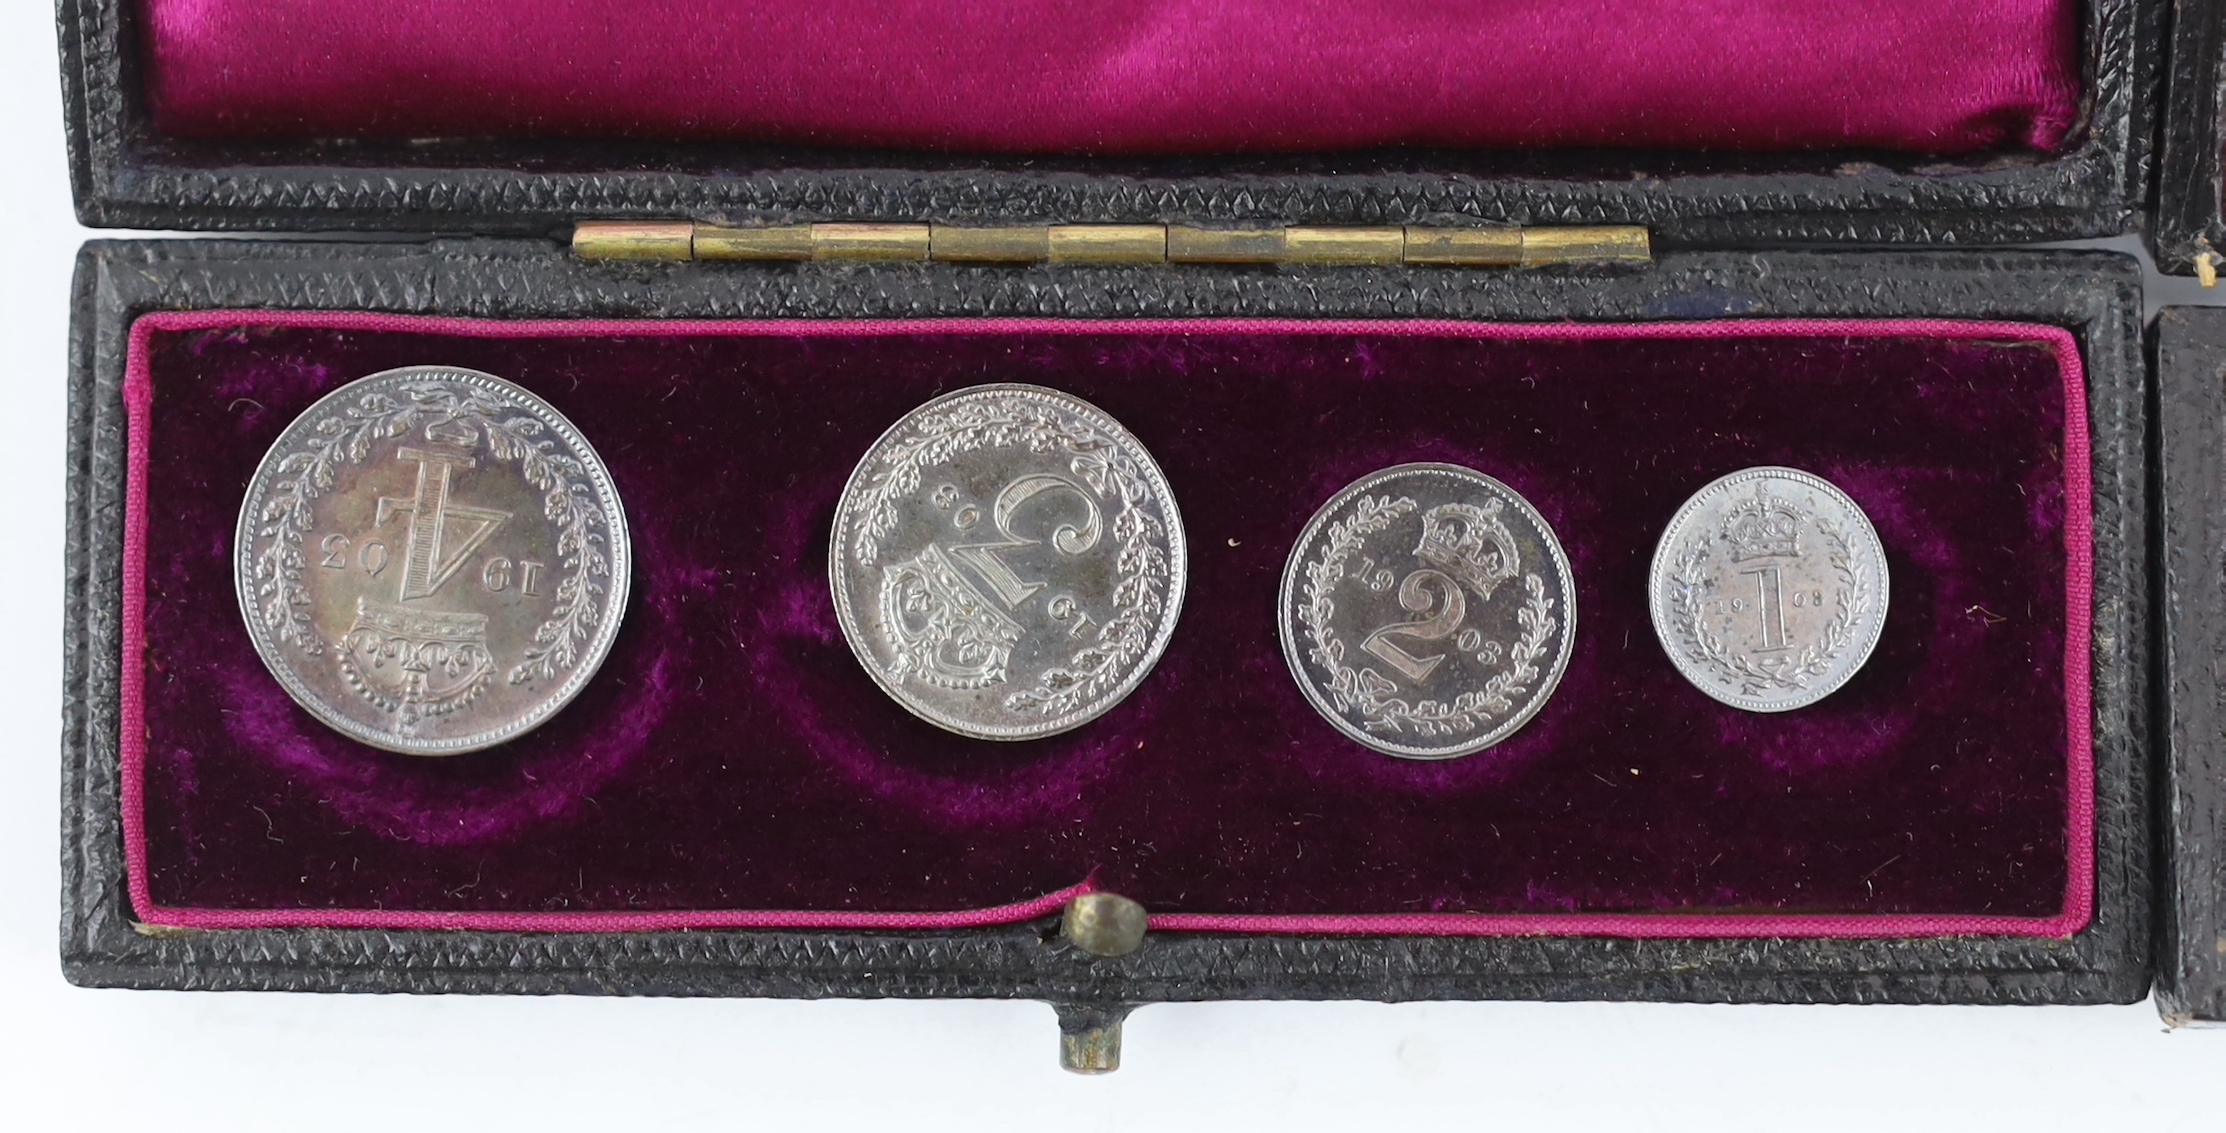 British coins, cased Victoria maundy coin set 1897, and cased Edward VII maundy coin set 1903 (2 cases)